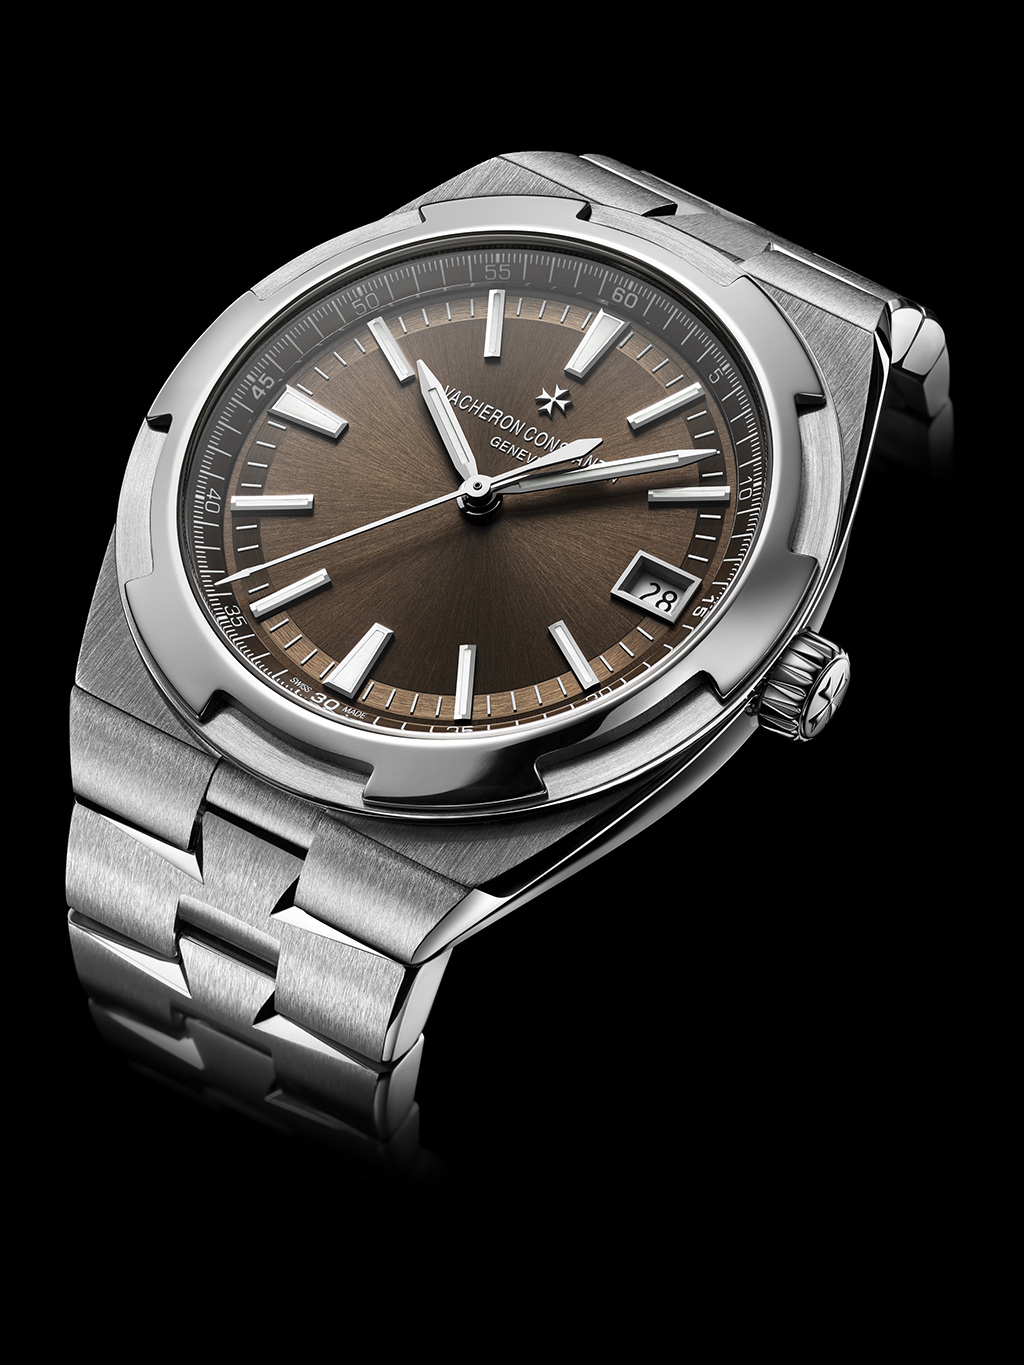 Overseas Automatic Date 4500V-110A-B146 with brown dial.